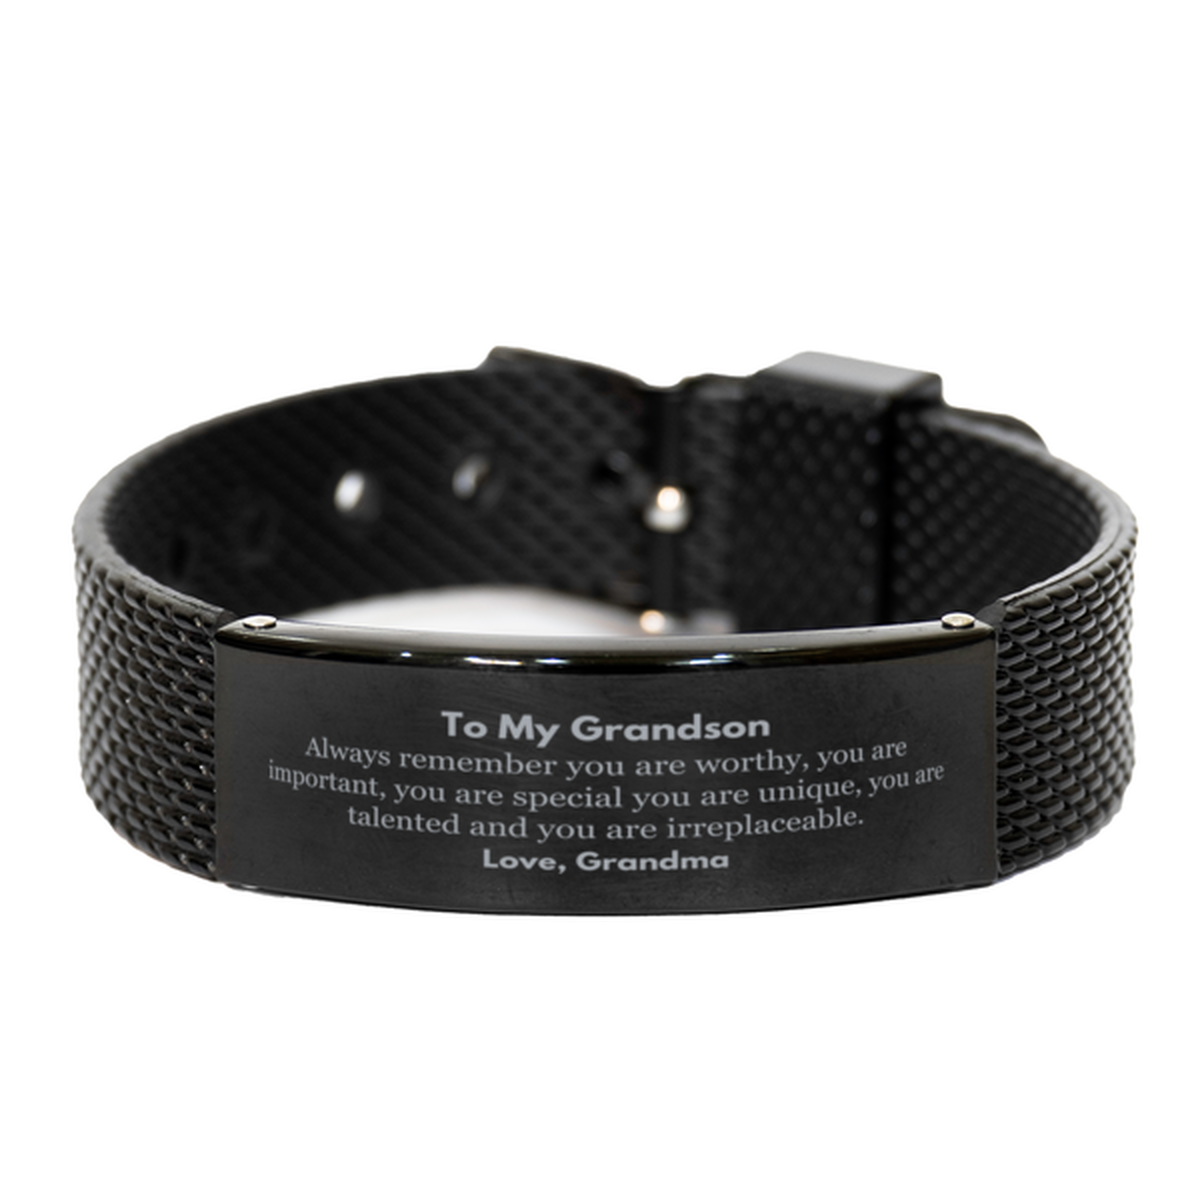 Grandson Birthday Gifts from Grandma, Inspirational Black Shark Mesh Bracelet for Grandson Christmas Graduation Gifts for Grandson Always remember you are worthy, you are important. Love, Grandma